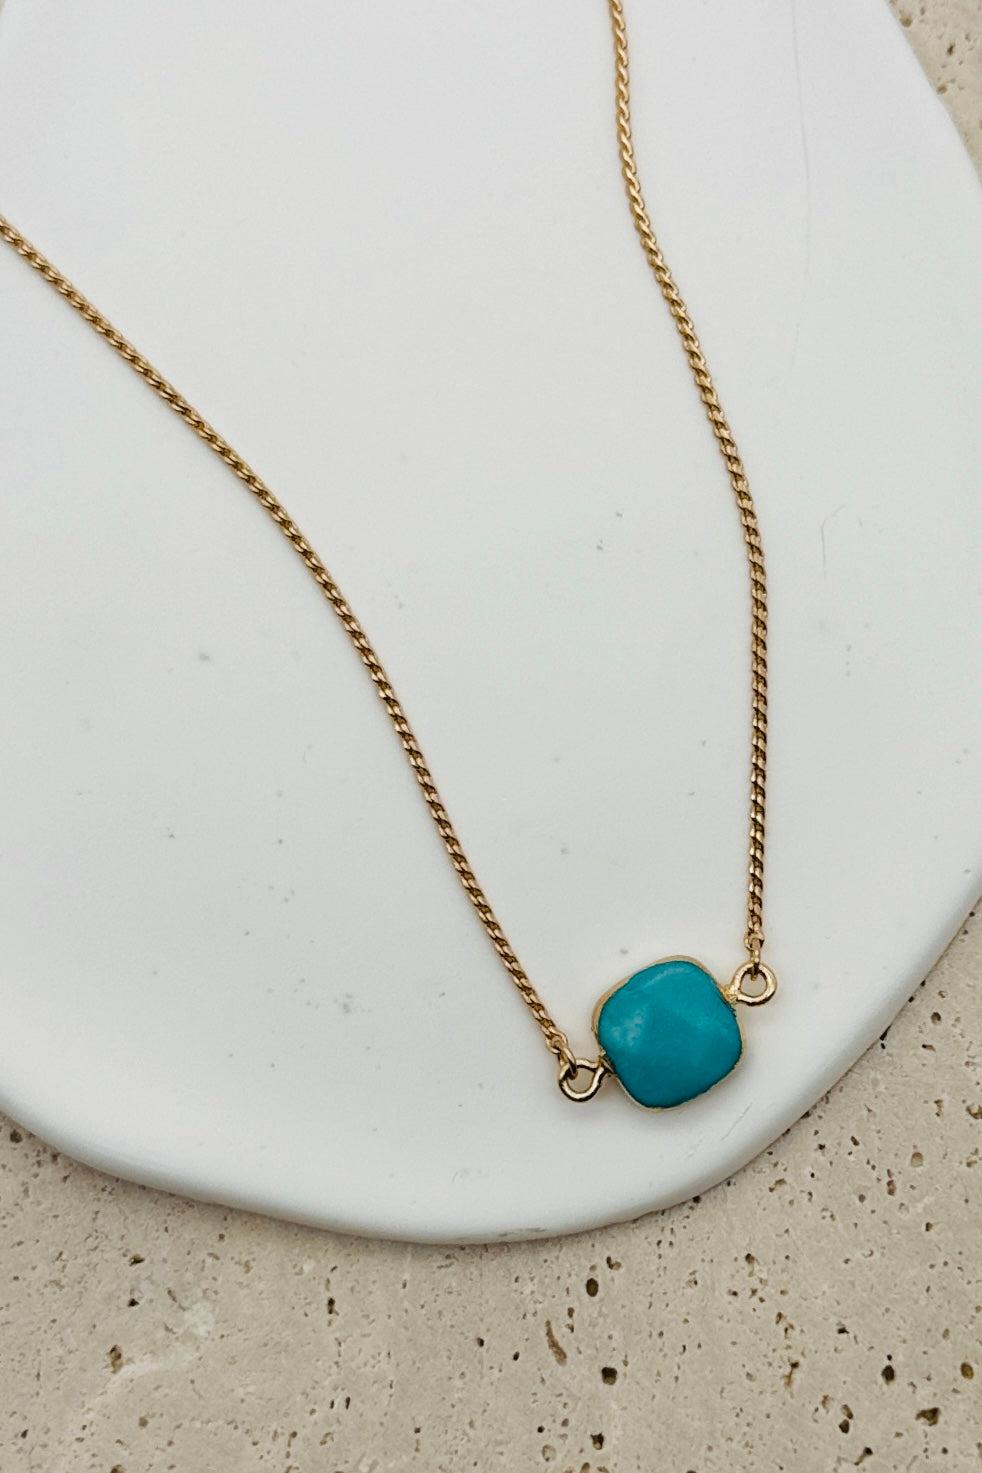 Square Stone Charm Necklace